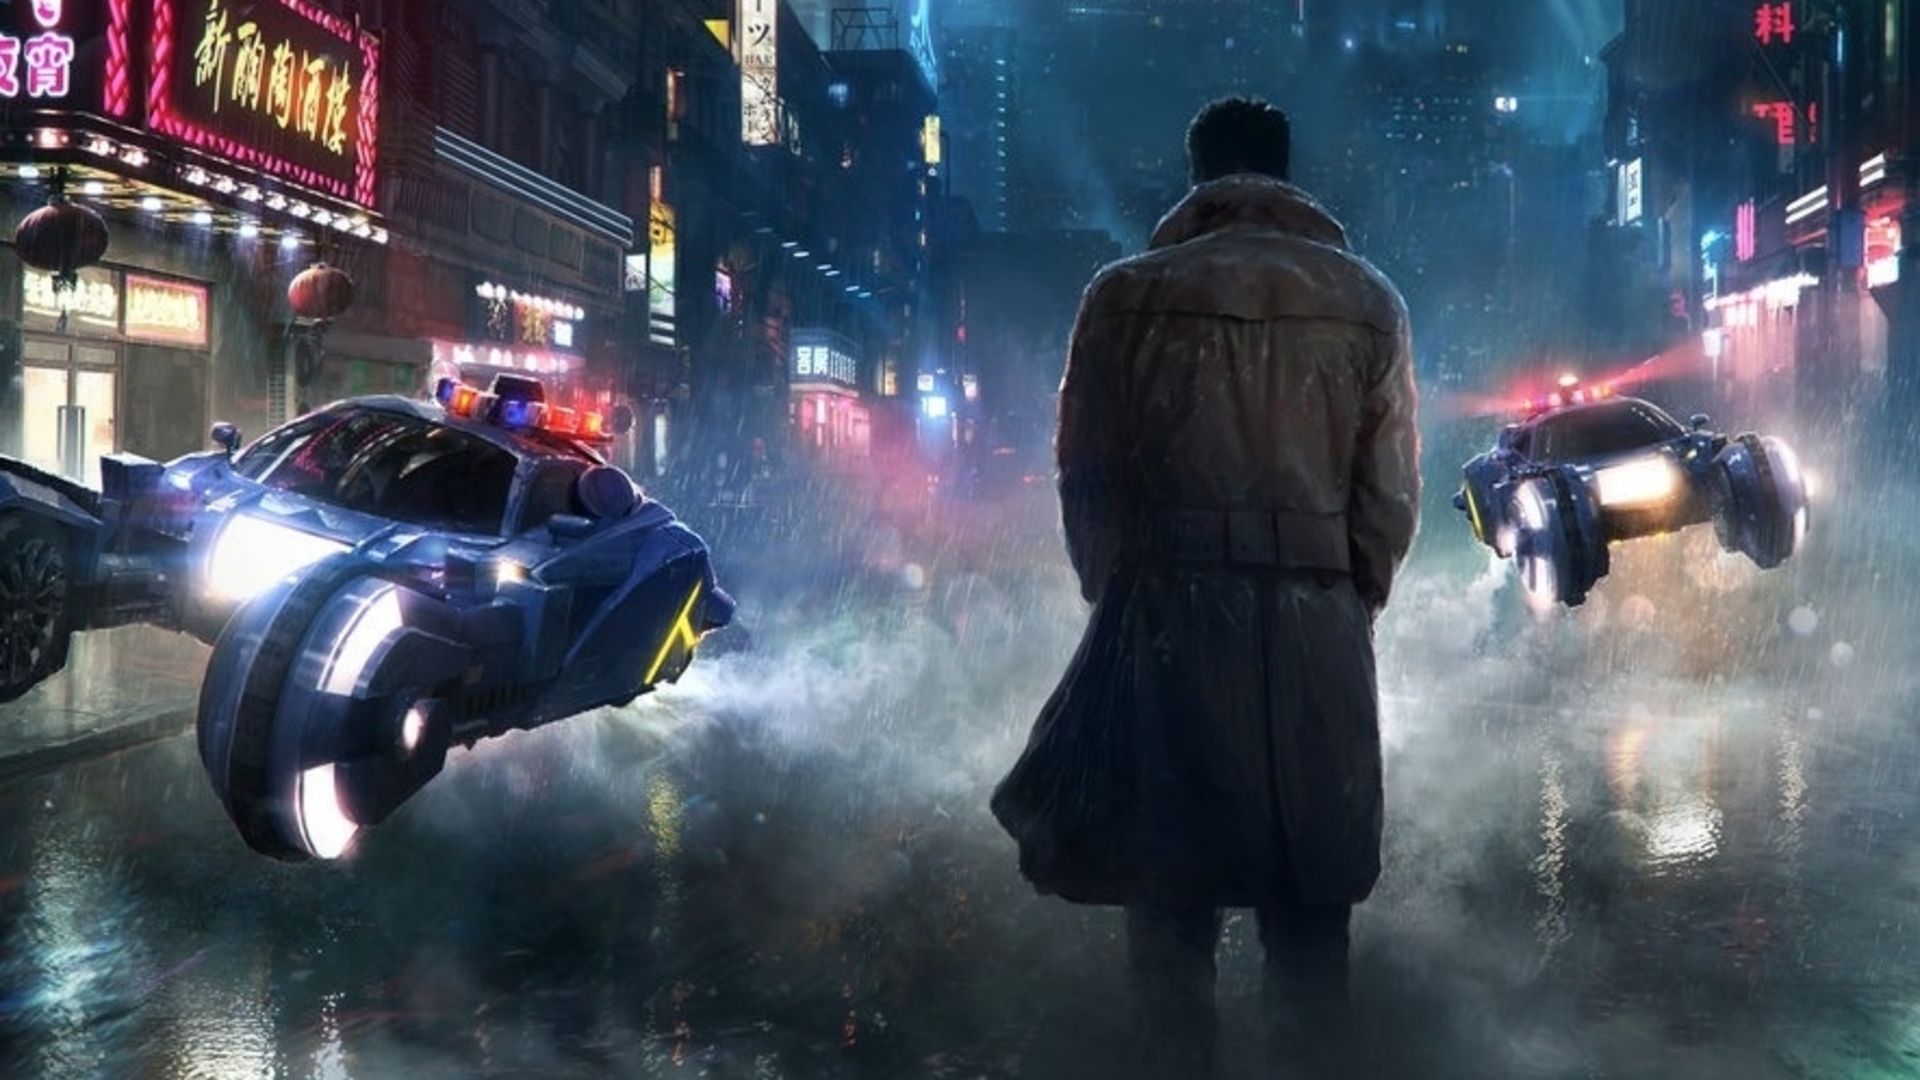 ‘Blade Runner 2099’ Series at Amazon Delays Production for a Year Due to WGA Strike